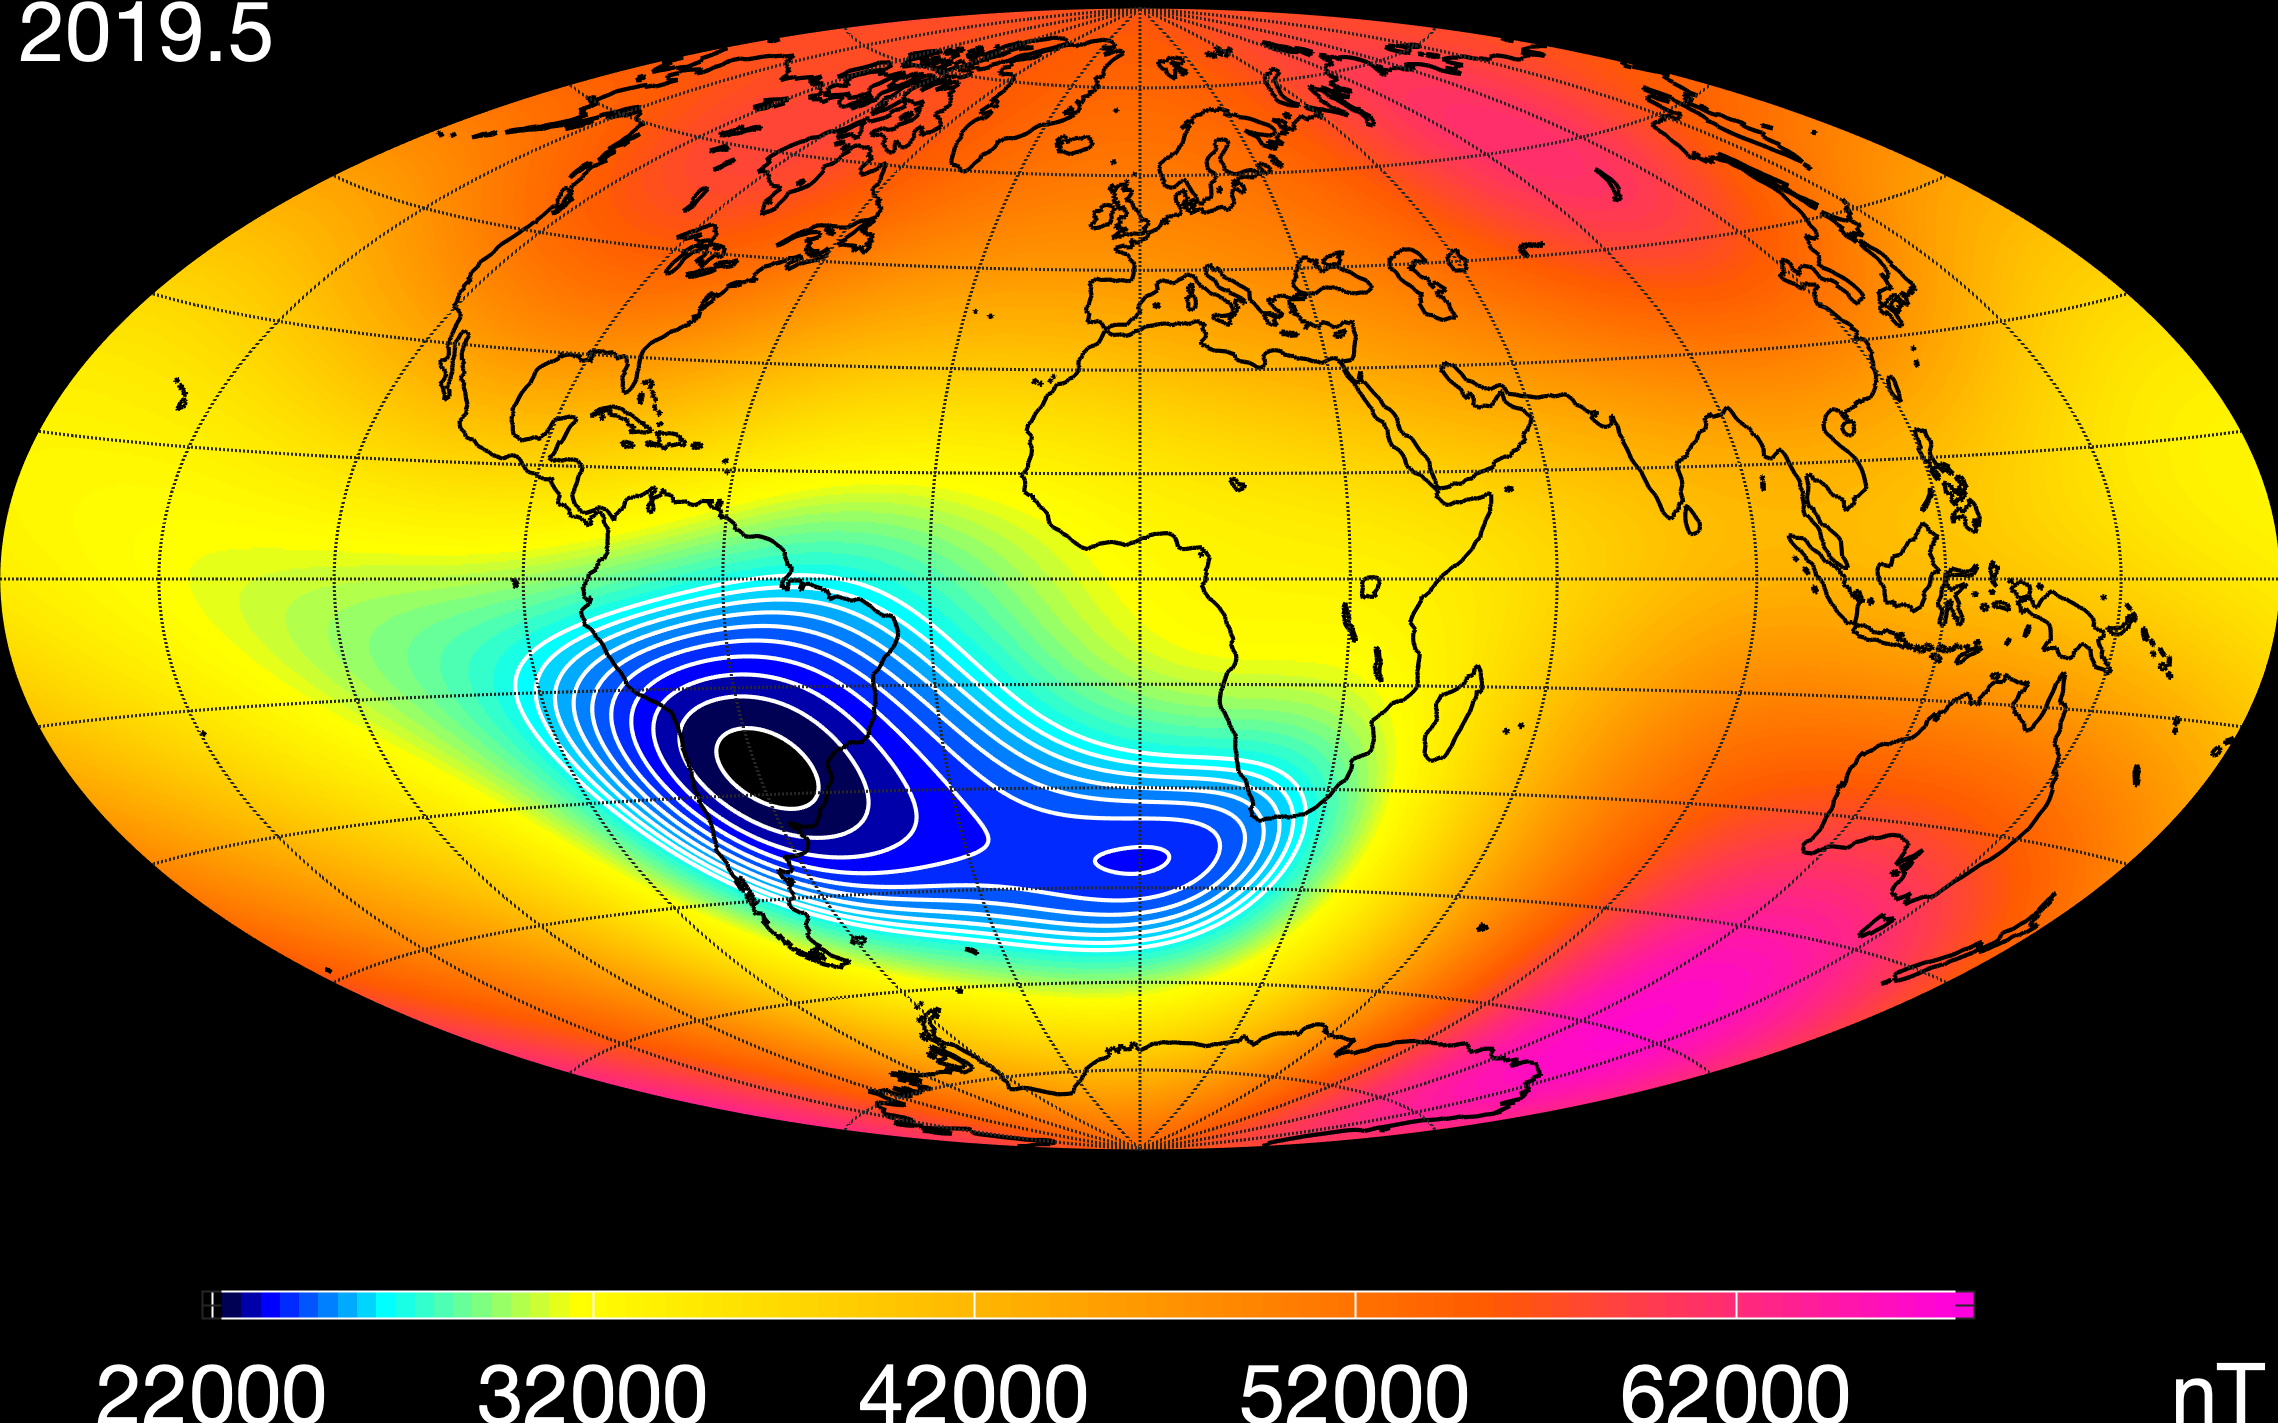 Recent evolution of the South Atlantic Anomaly CoreSat